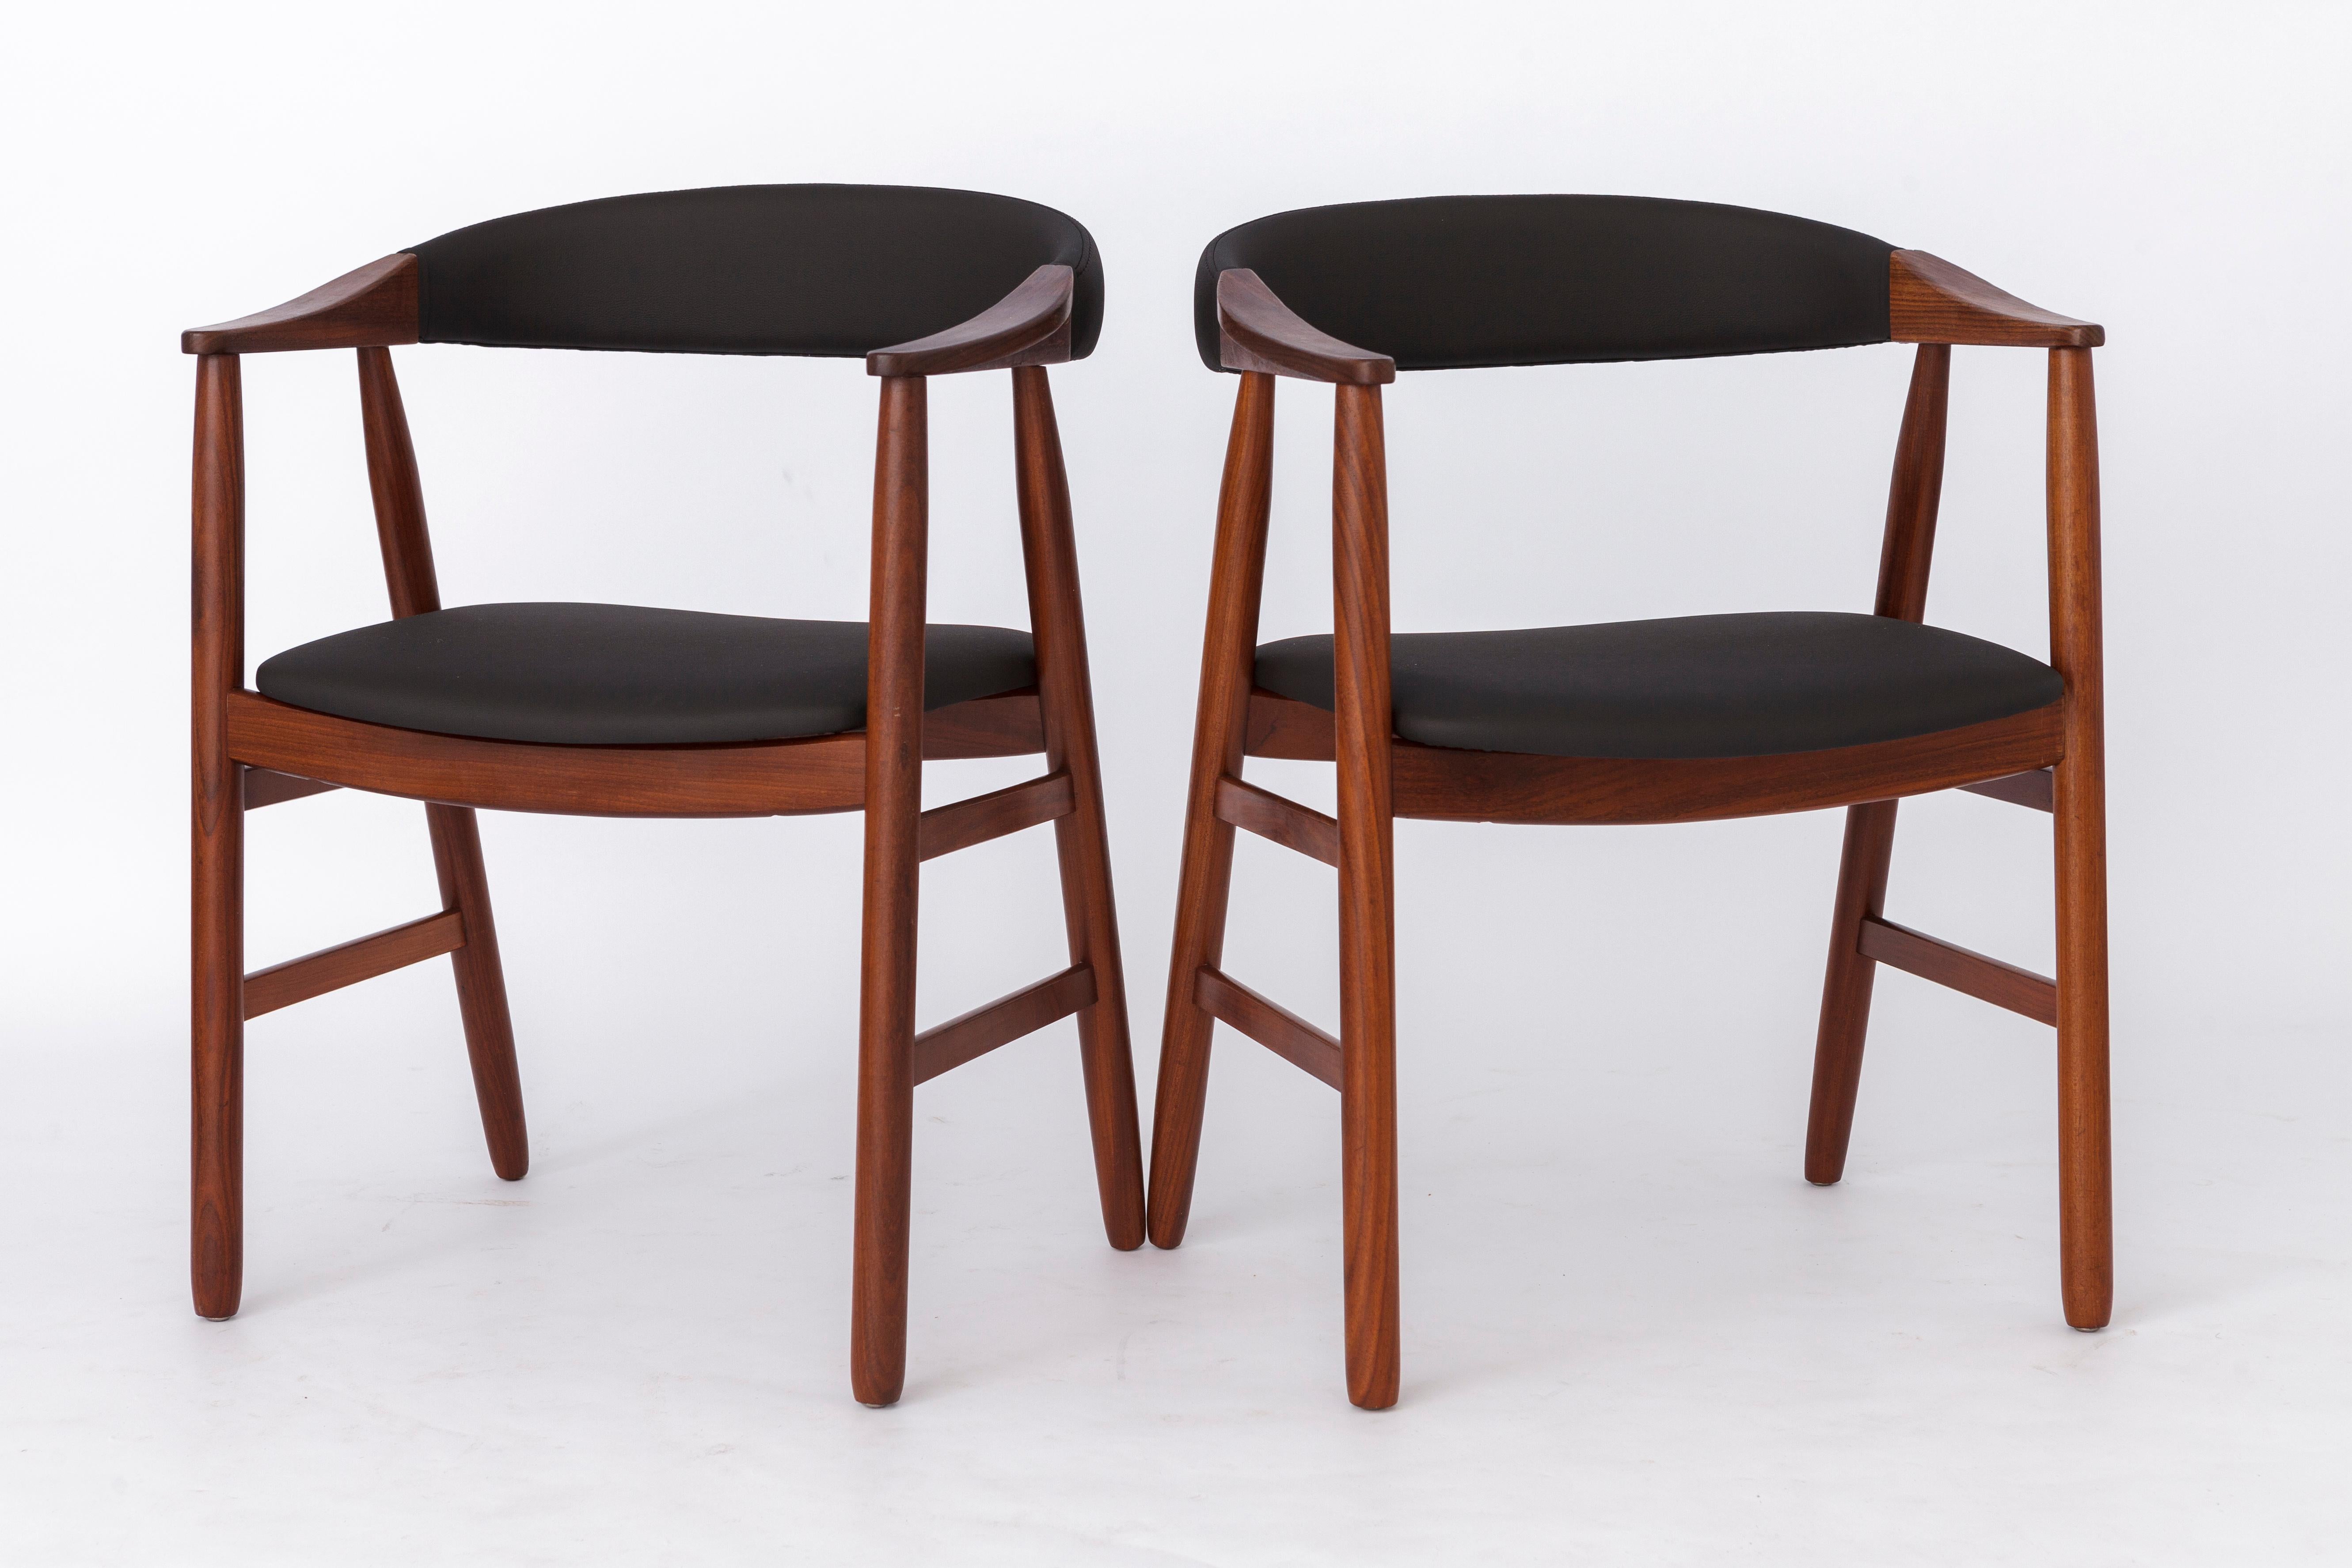 2 Vintage chairs from the manufacturer Farstrup, Denmark,
designed by Thomas Harlev. 
Displayed price is for a pair. Totally up to 3 chairs available. 
Please DM if you are looking for 3 chairs. 

Very good condition. Stable stand. 
No cracks or